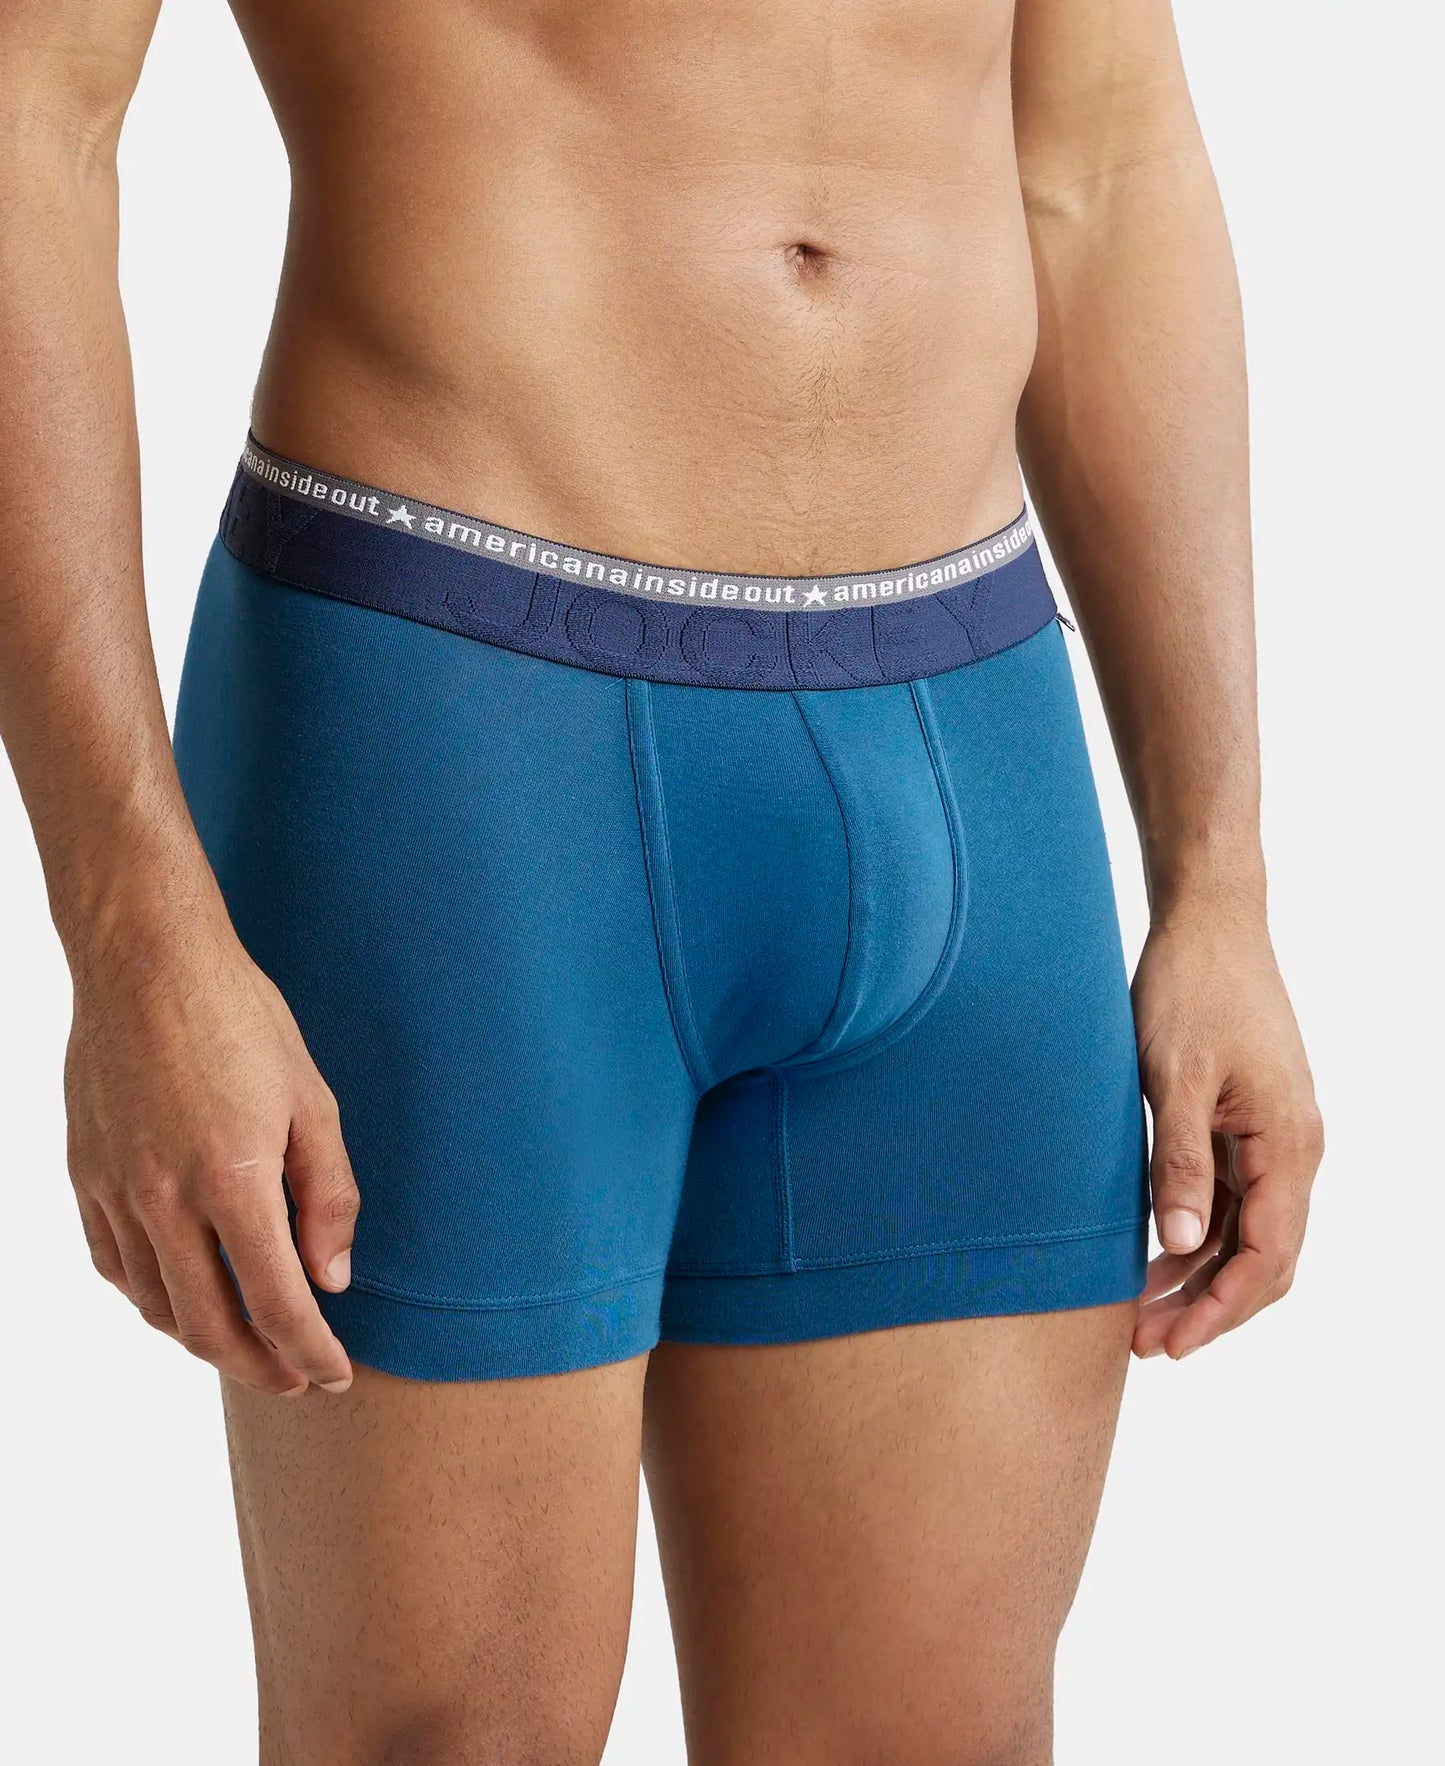 Super Combed Cotton Elastane Solid Trunk with Ultrasoft Waistband - Seaport Teal-2